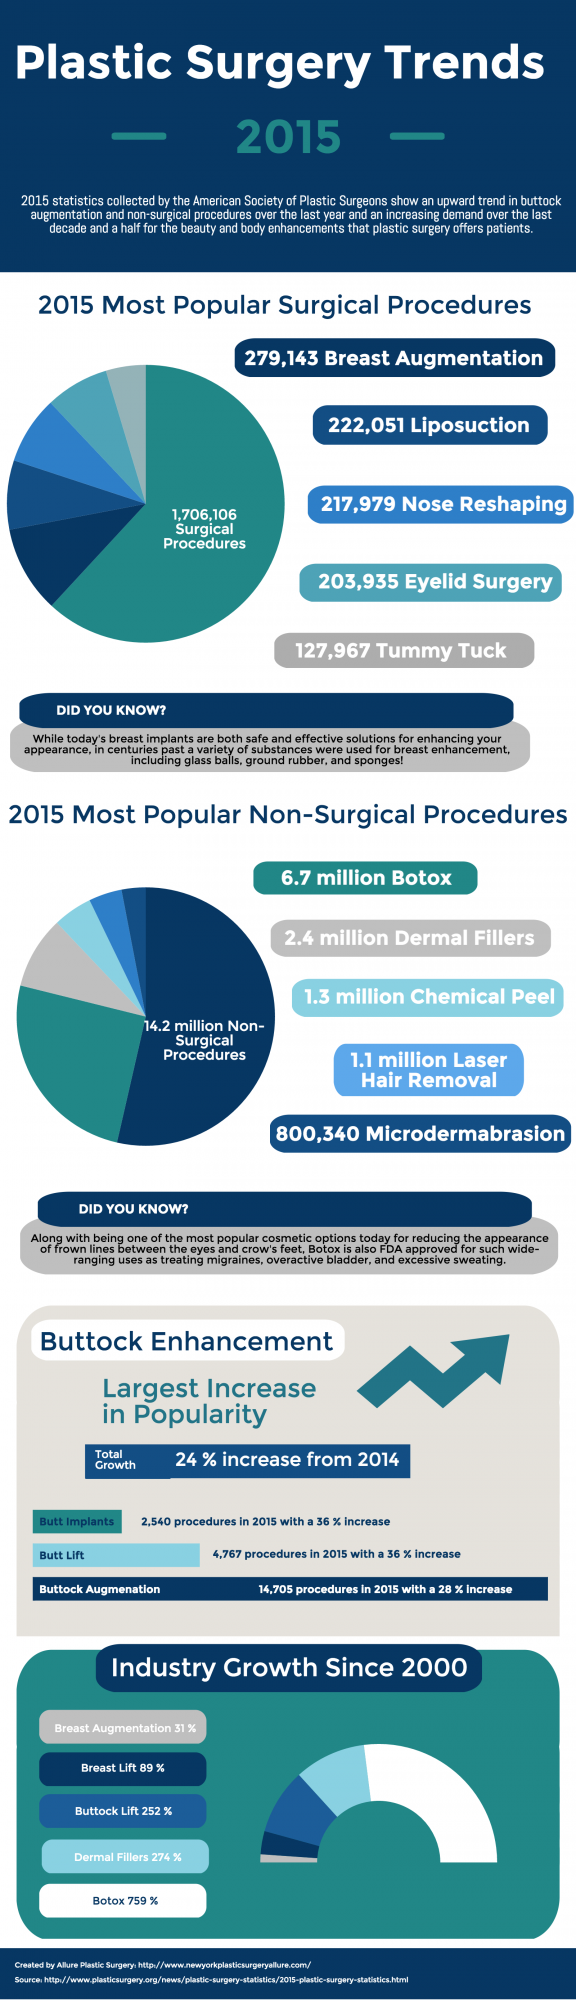 Infographic Plastic Surgery Trends 2015